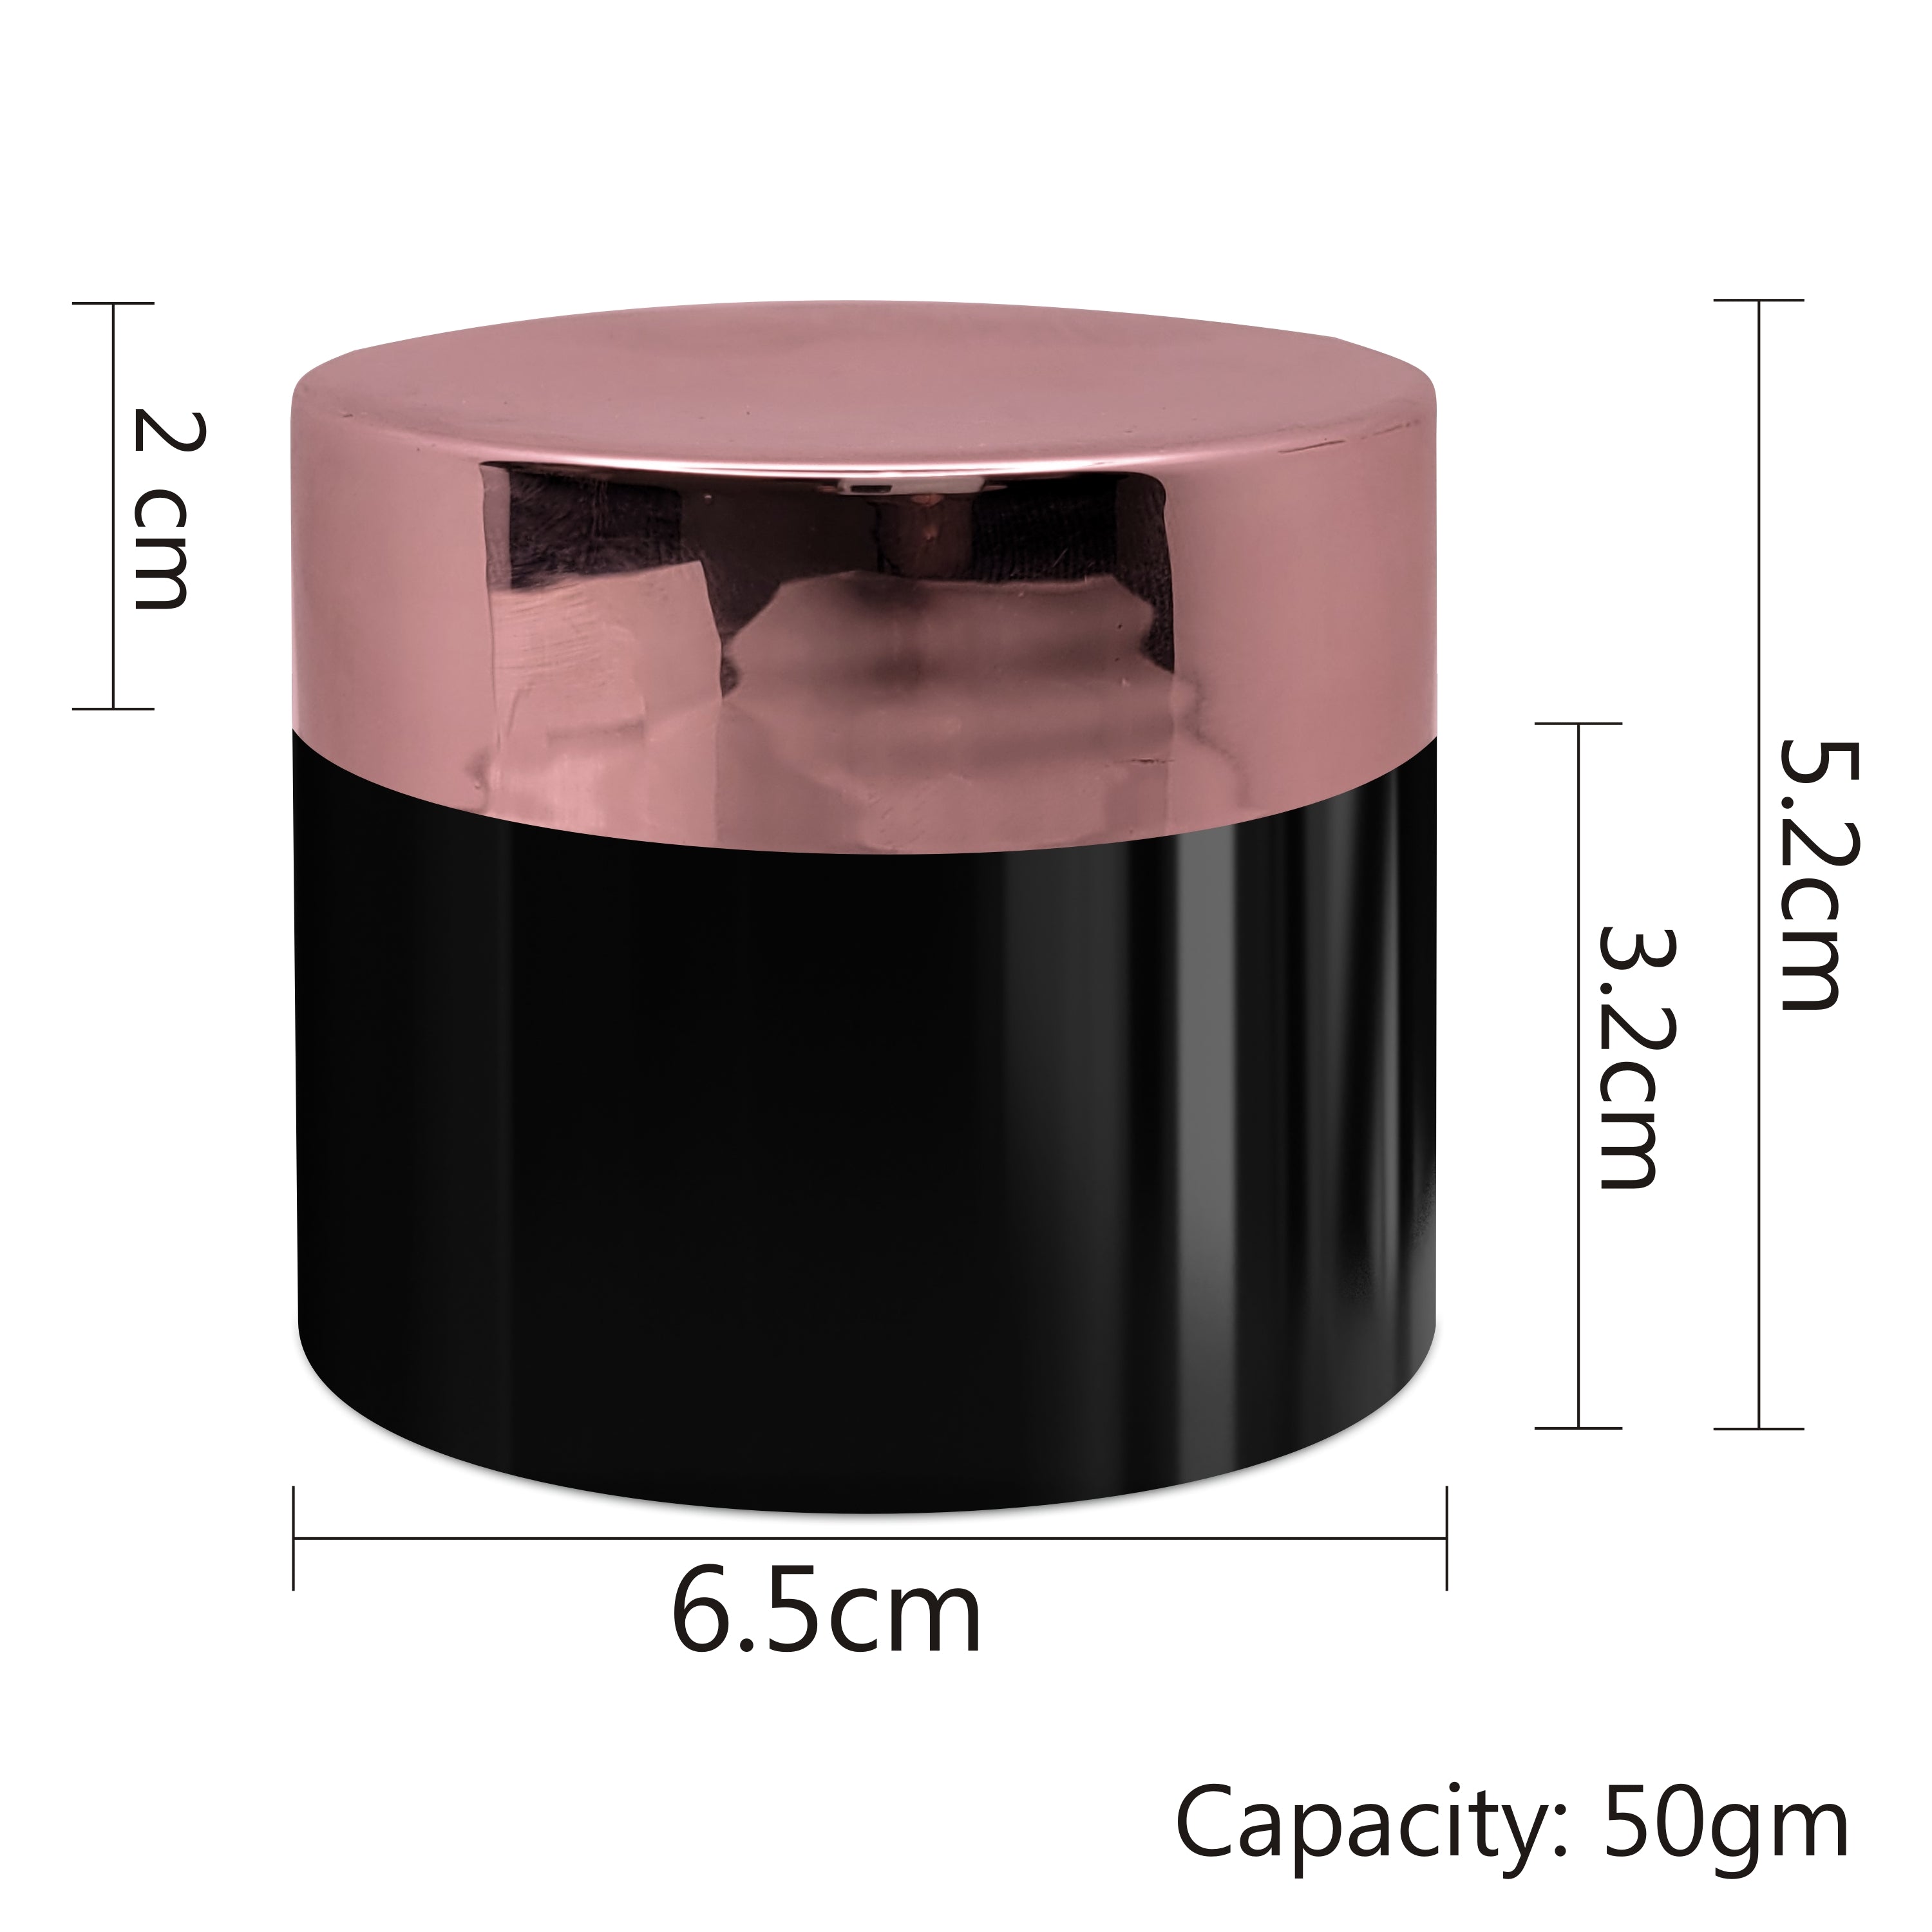 Empty Black color cosmetic jars with Rose gold cap 50gm & 100gm [ZMJ18]